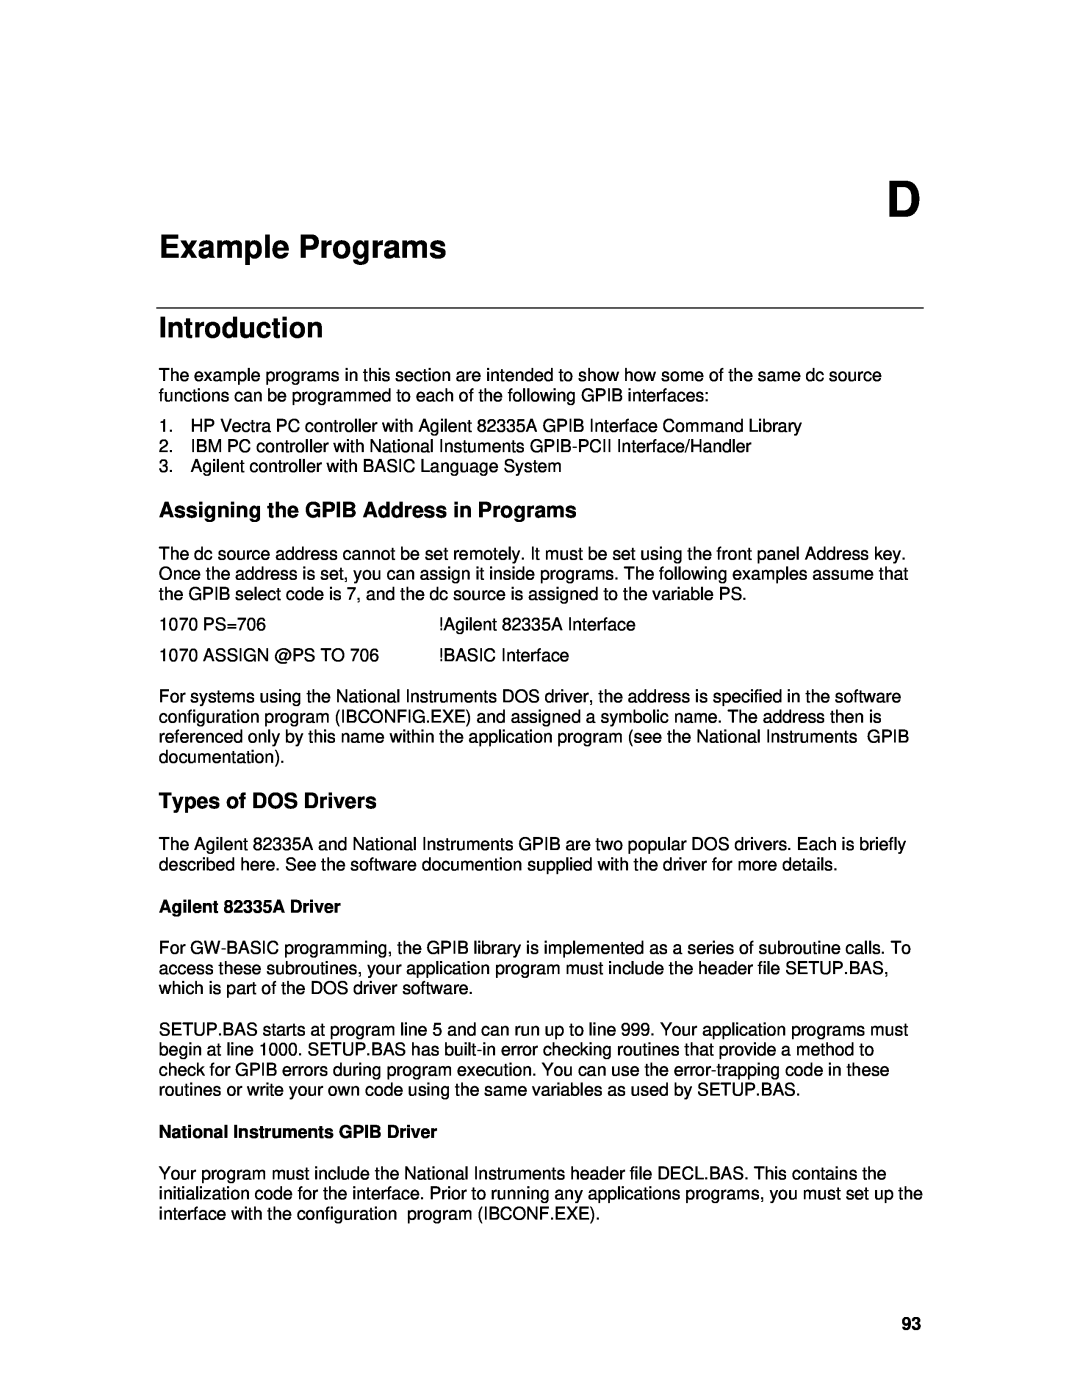 Agilent Technologies 6632B Example Programs, Assigning the GPIB Address in Programs, Types of DOS Drivers, Introduction 